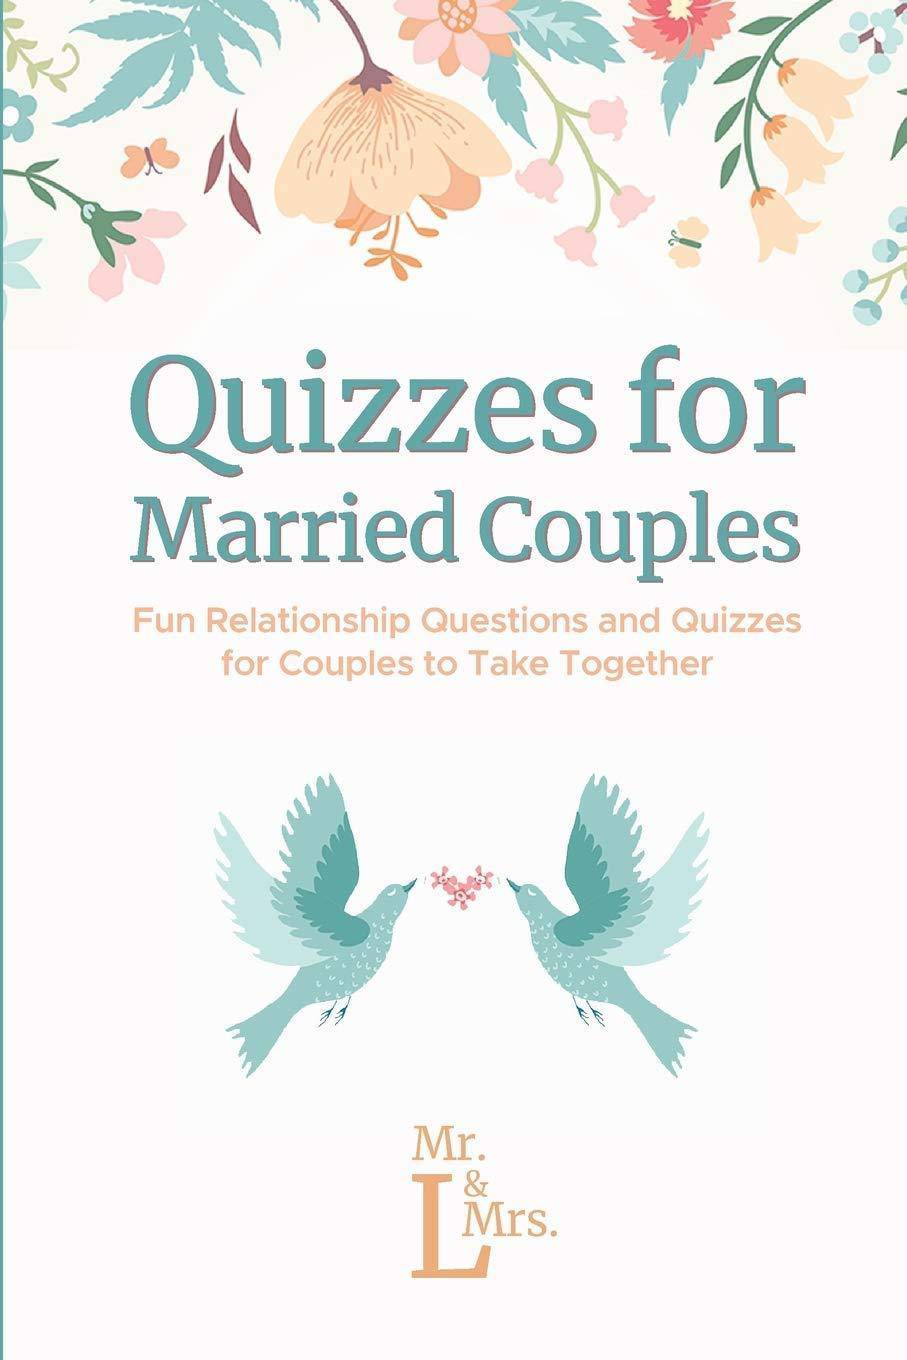 Quizzes for Married Couples - SureShot Books Publishing LLC